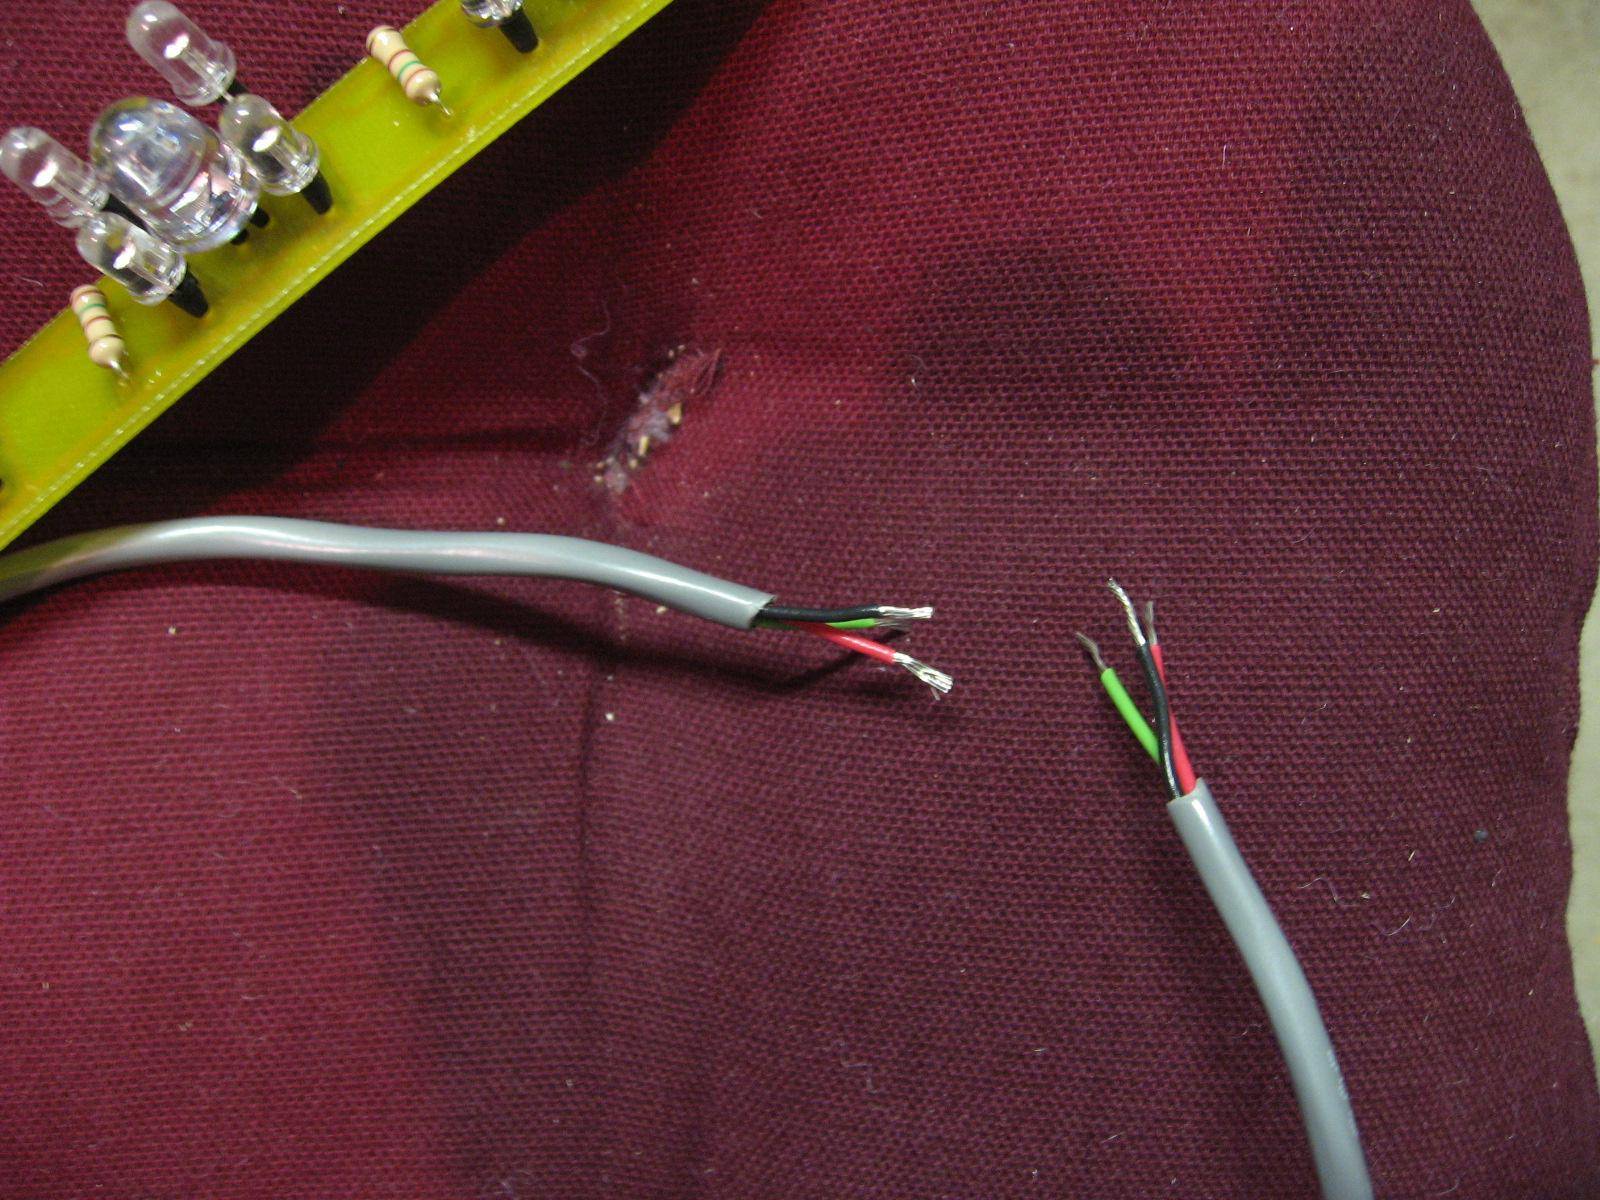 These three wires will have to be reconnected once you get the harness routed in the box